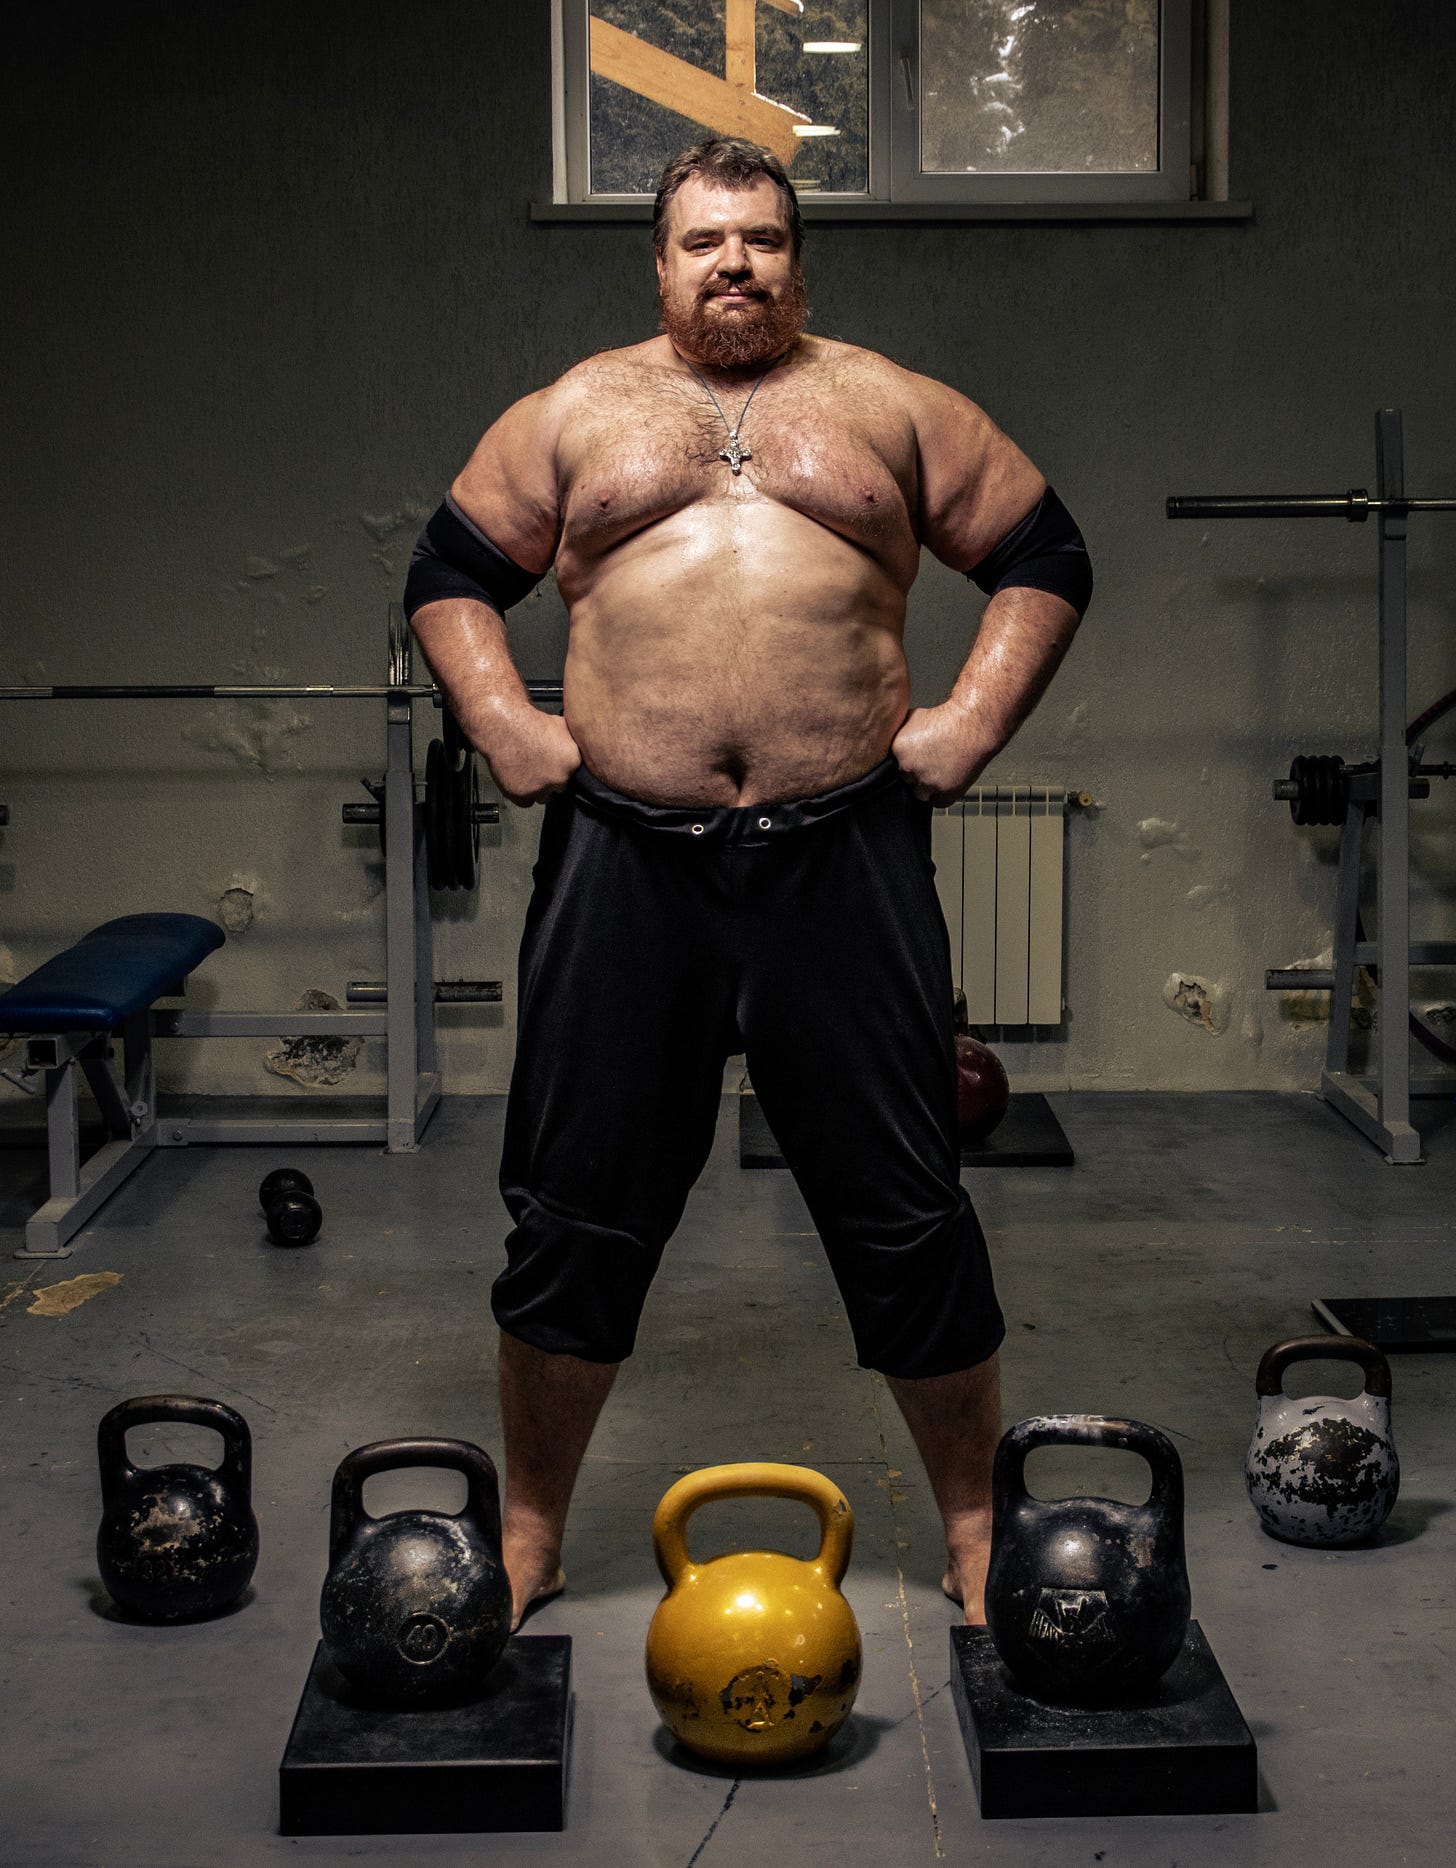 A photo of a strongman standing in a gym surrounded by kettlebells.